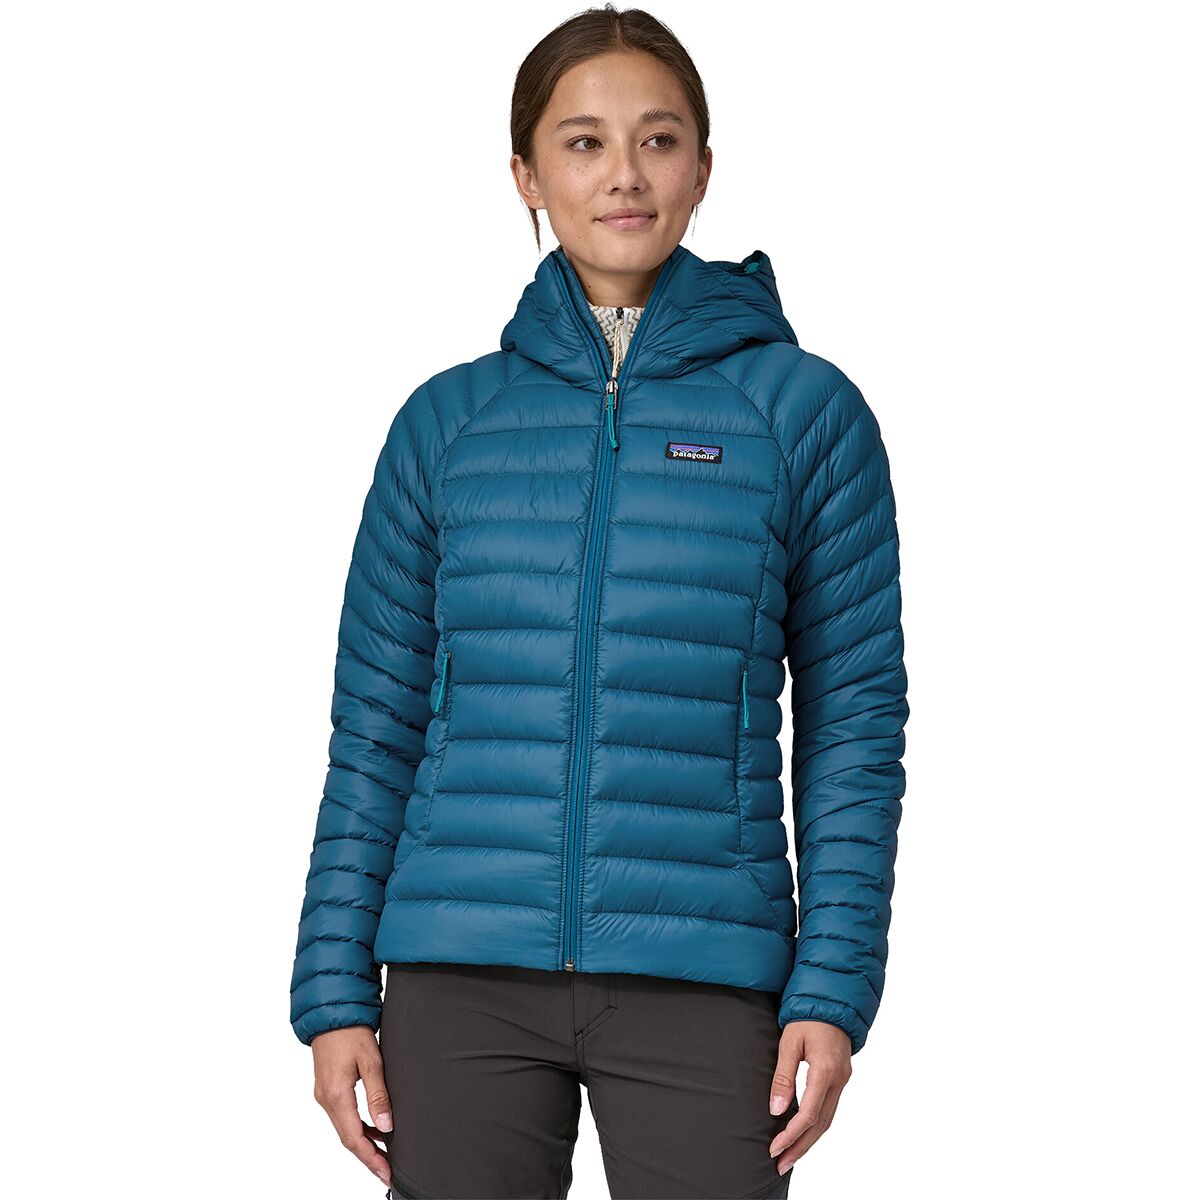 Patagonia Down Sweater Full-Zip Hooded Jacket - Women's - Clothing | Backcountry